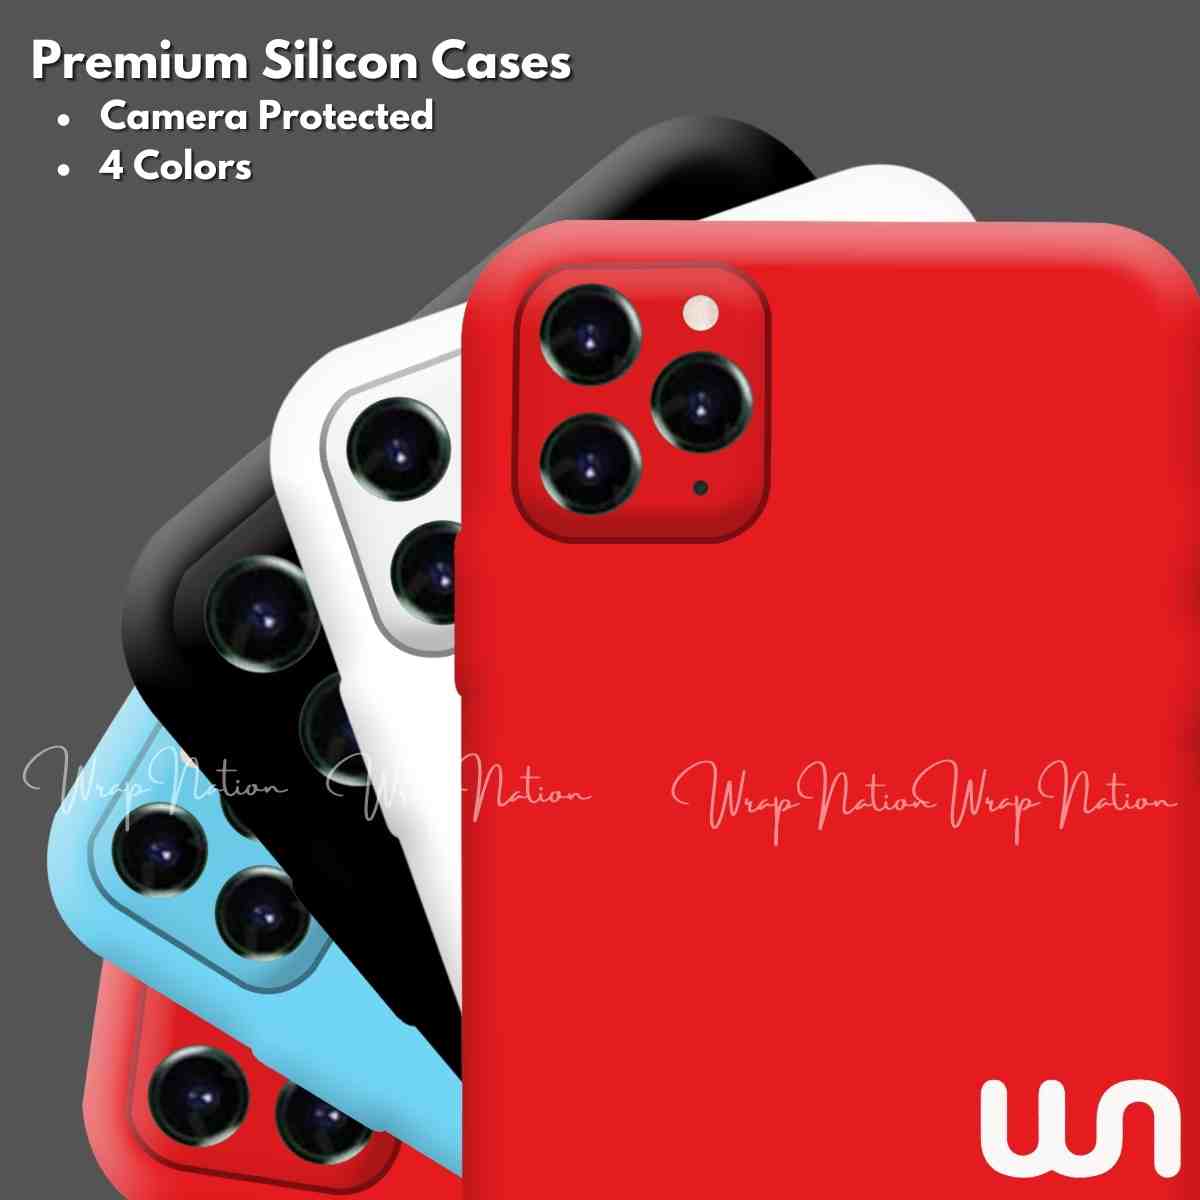 Color Silicon Cases with for Iphone 11 Pro